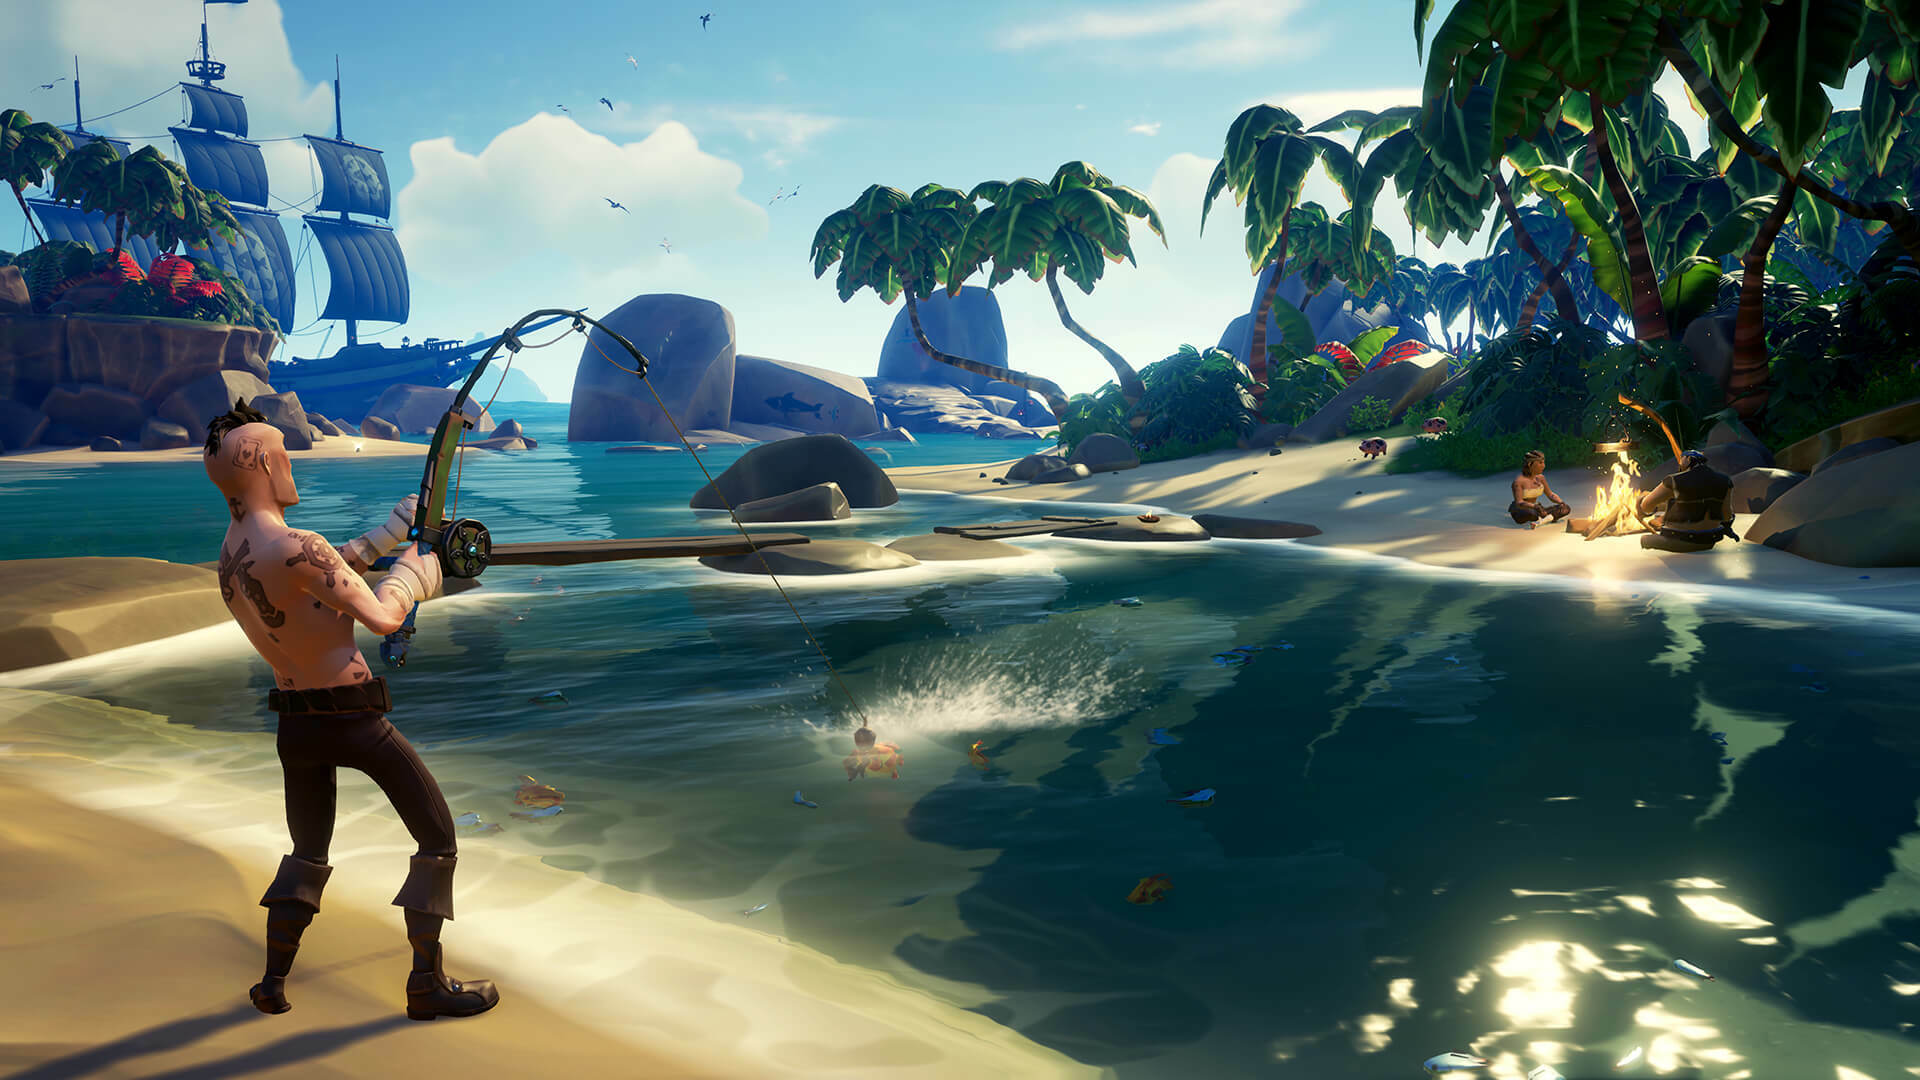 Sea of Thieves will introduce PvP-free servers, 24-player guilds